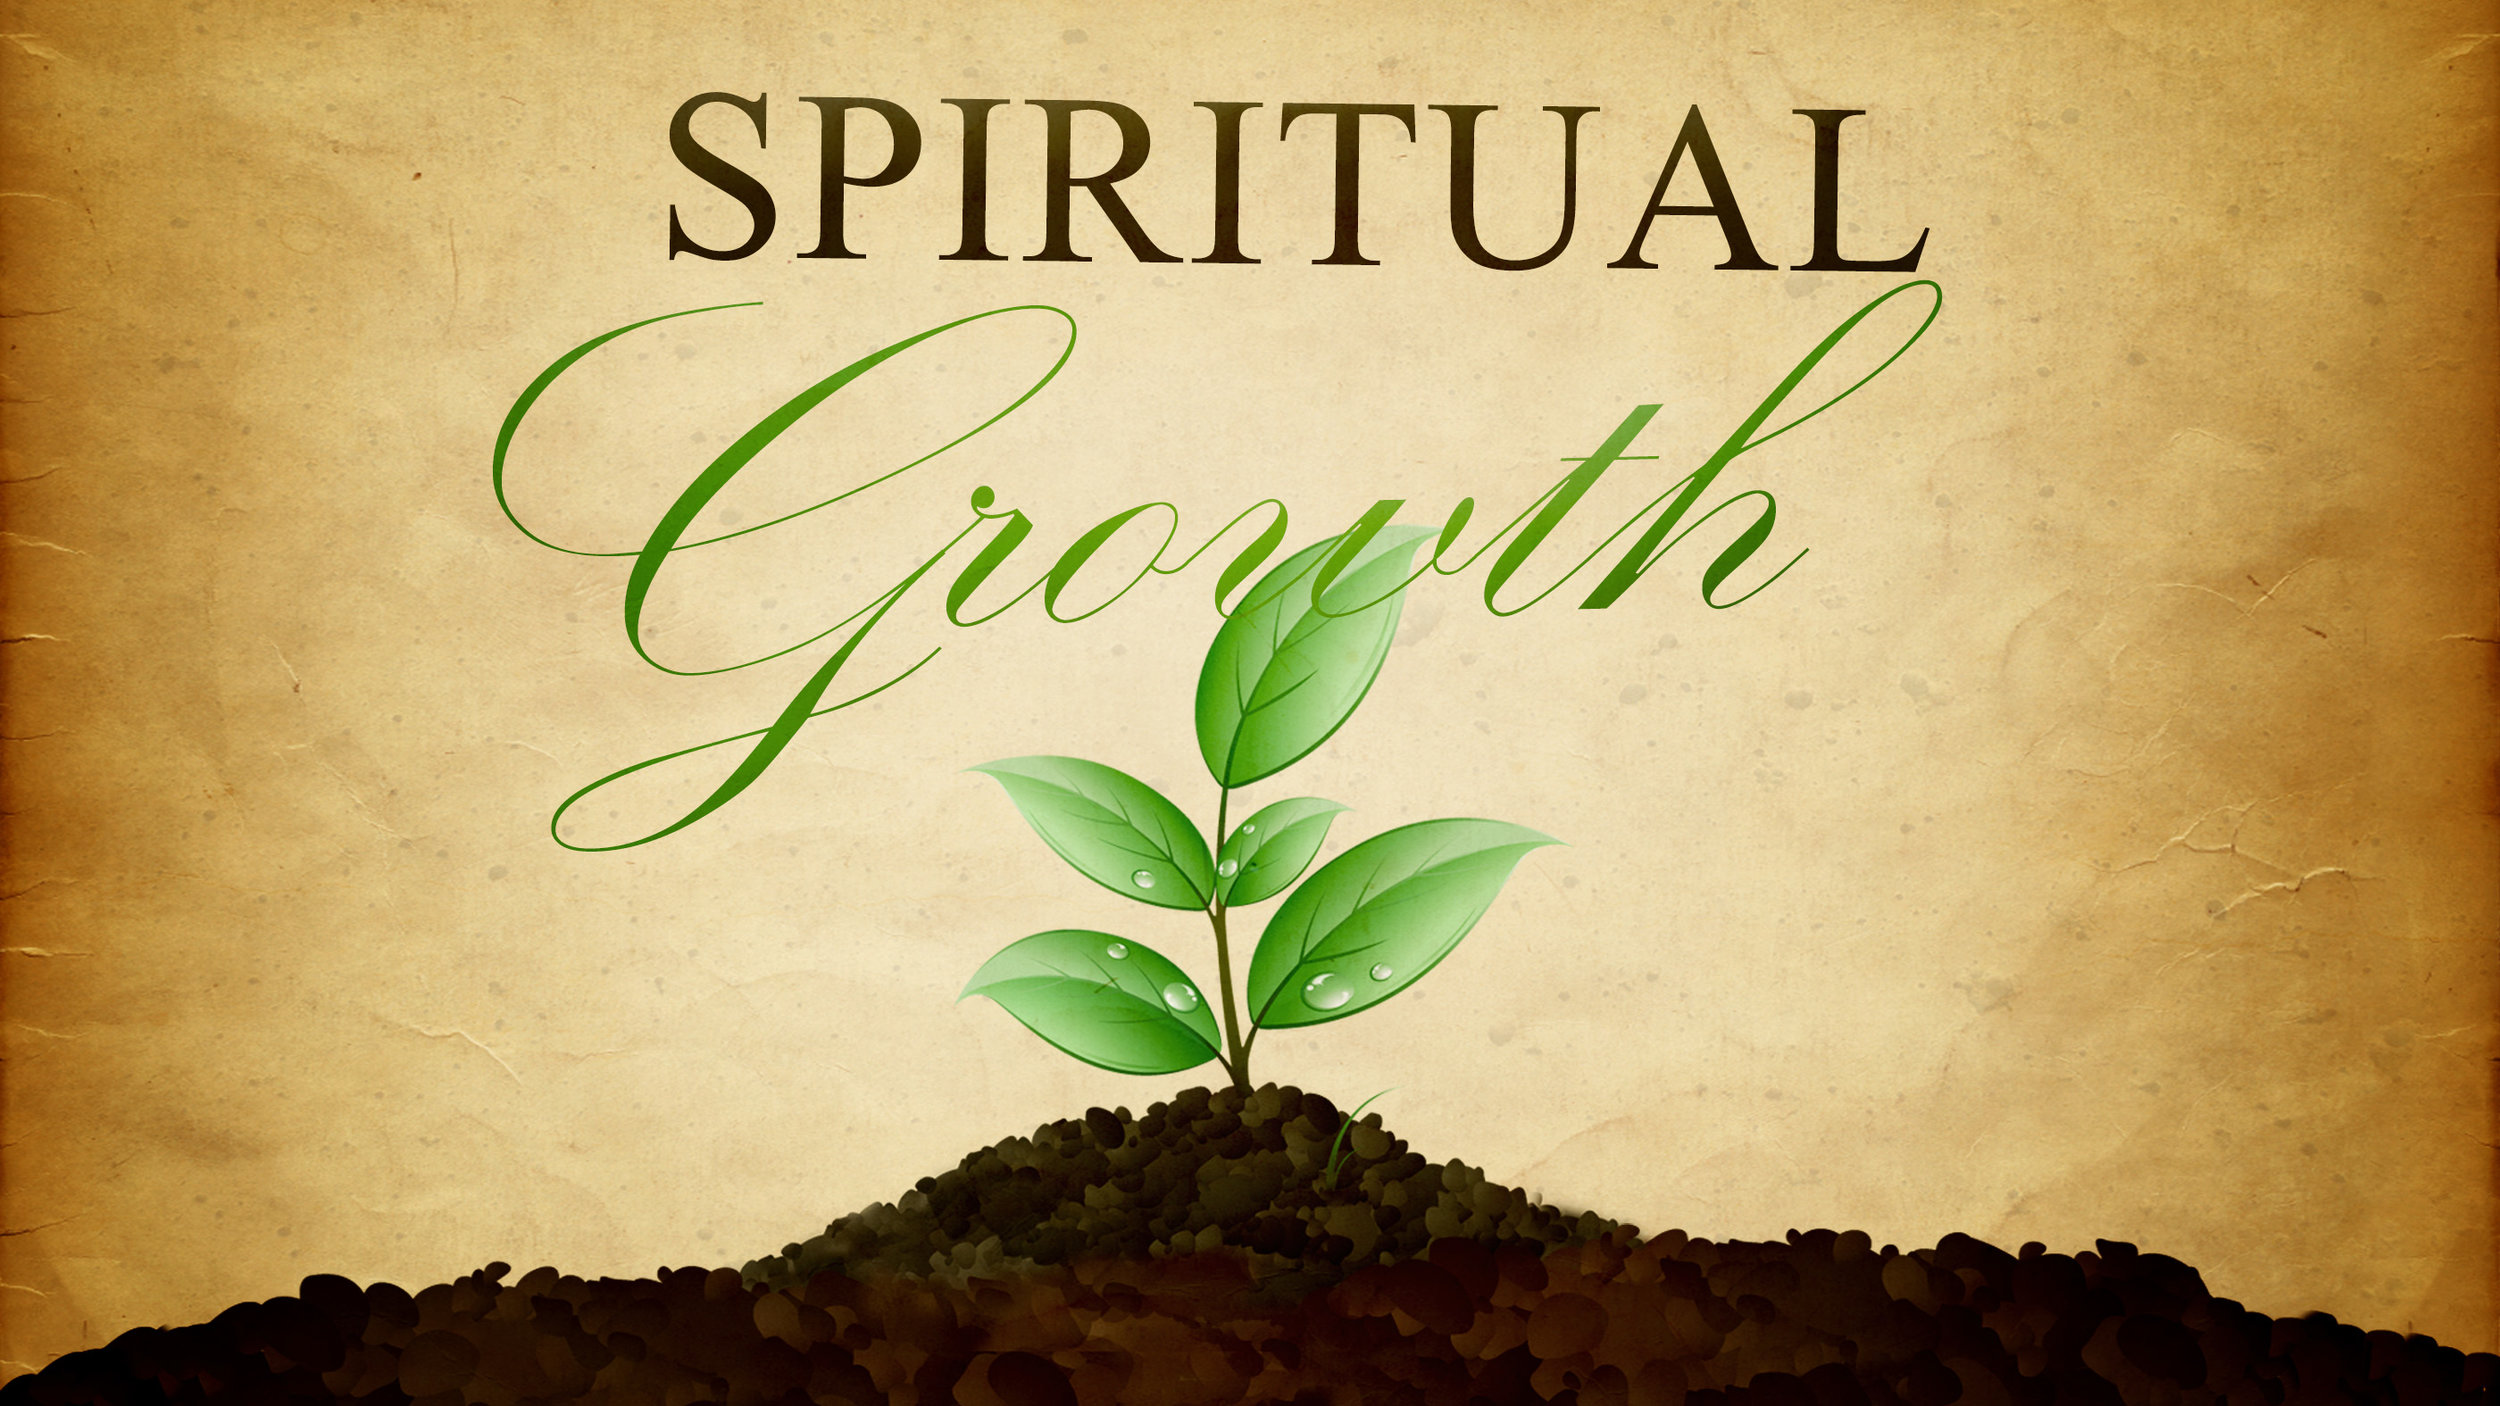 how to activate spiritual growth in your christian life. the divine keys and principles to enable you connect to your growth in your christian life. how to transform in your christian life. the methodology of christian growth and strategies for Christians and believers to mature in their christian life.